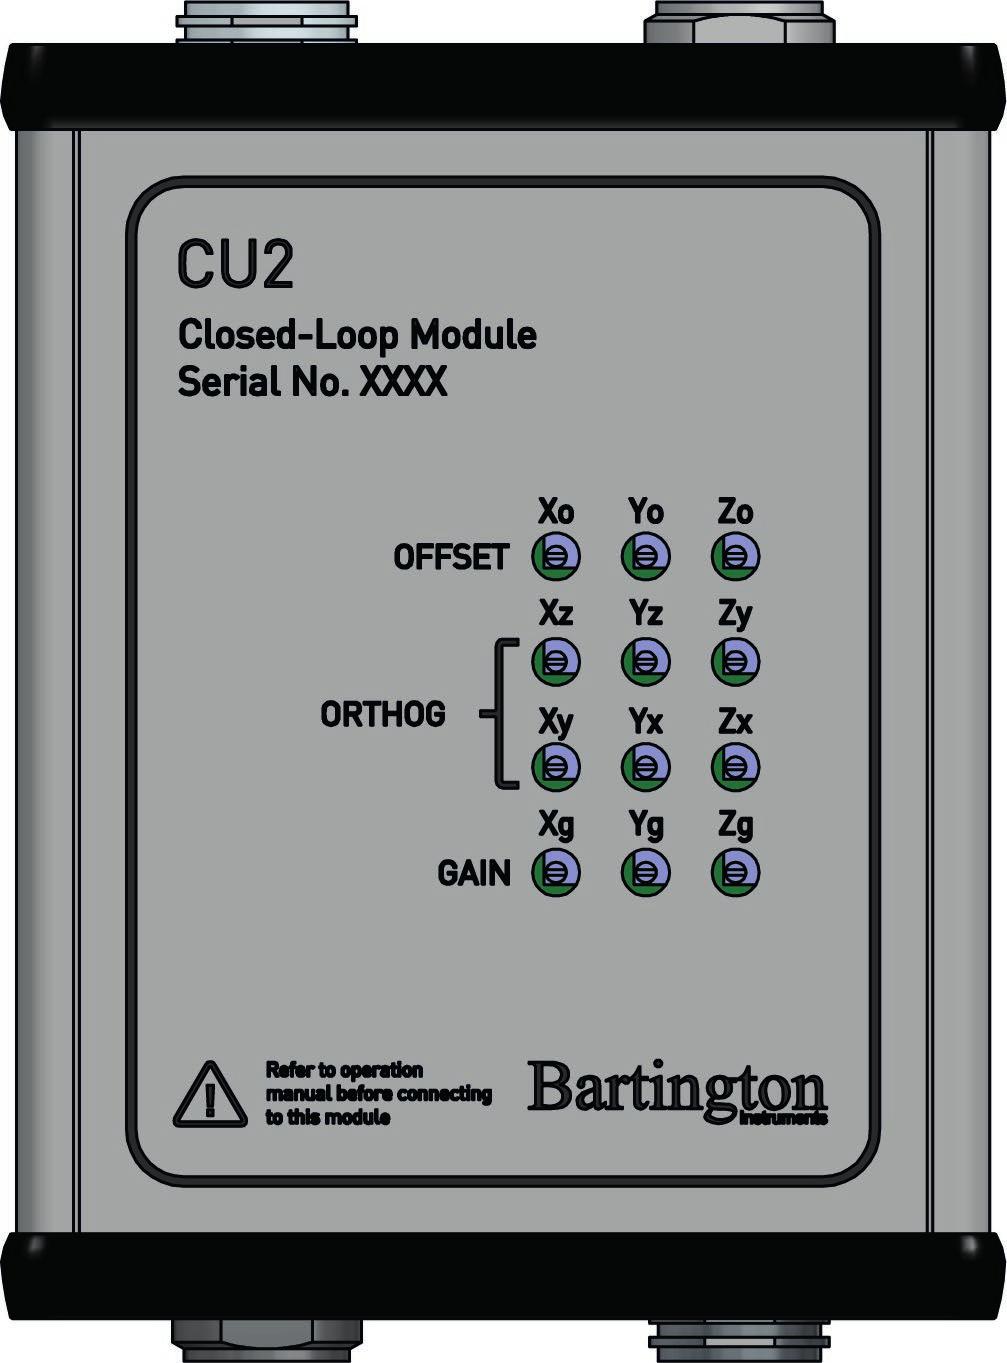 Current Control Input [3]: this provides three differential analogue inputs and should be connected to the CU1 current control output.